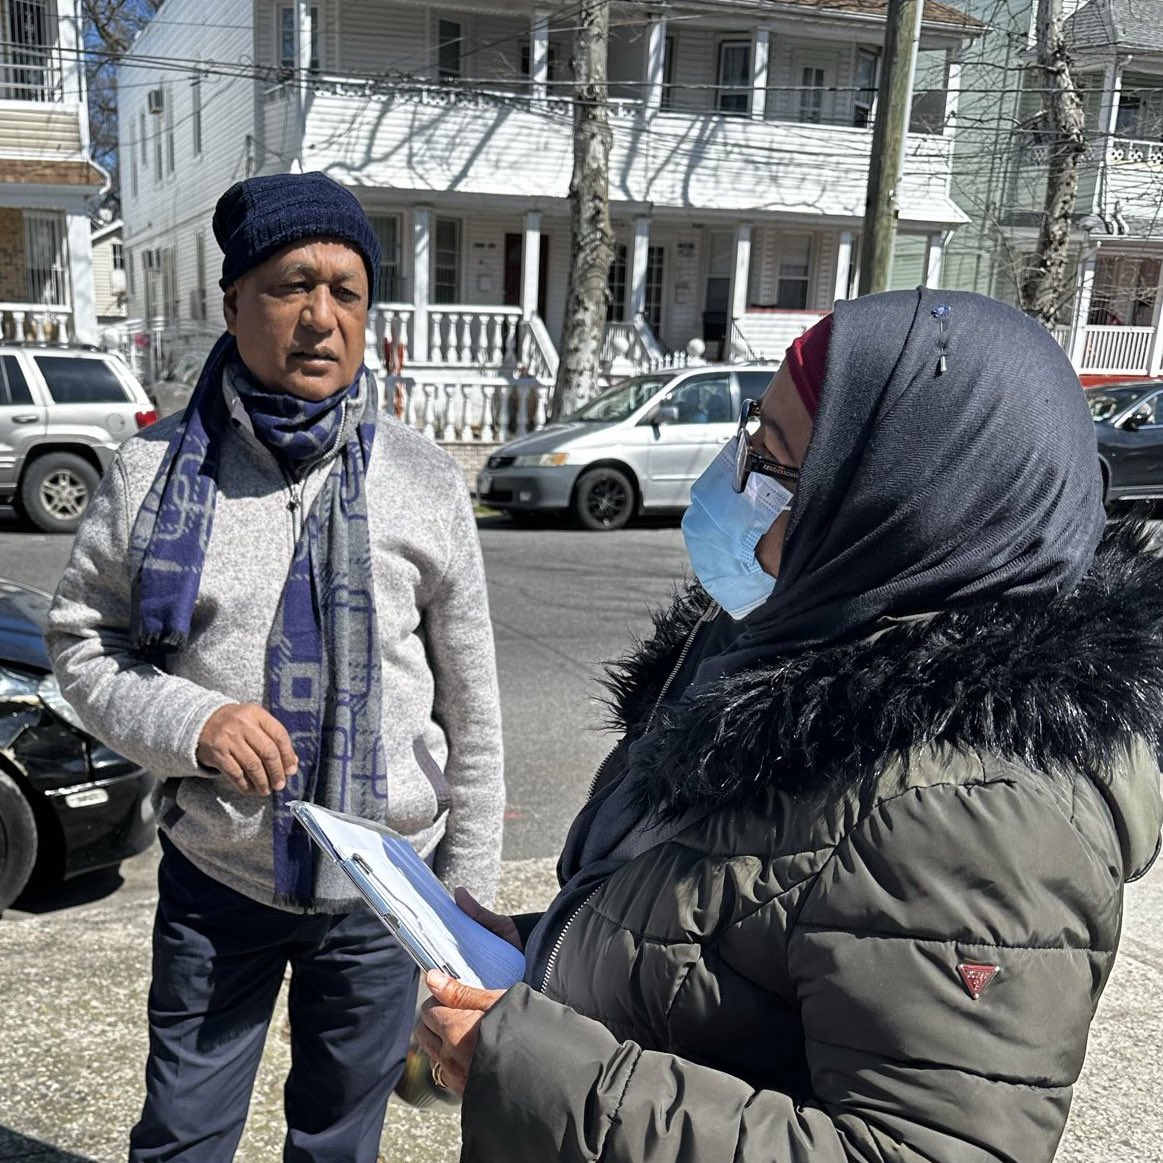 New Yorkers are sick of @NYCMayor’s budget chaos! This weekend, we canvassed in Richmond Hill and South Queens to fight for a #PeoplesBudget #CareNotCuts for housing, libraries, CUNY, schools, childcare & other essential services.